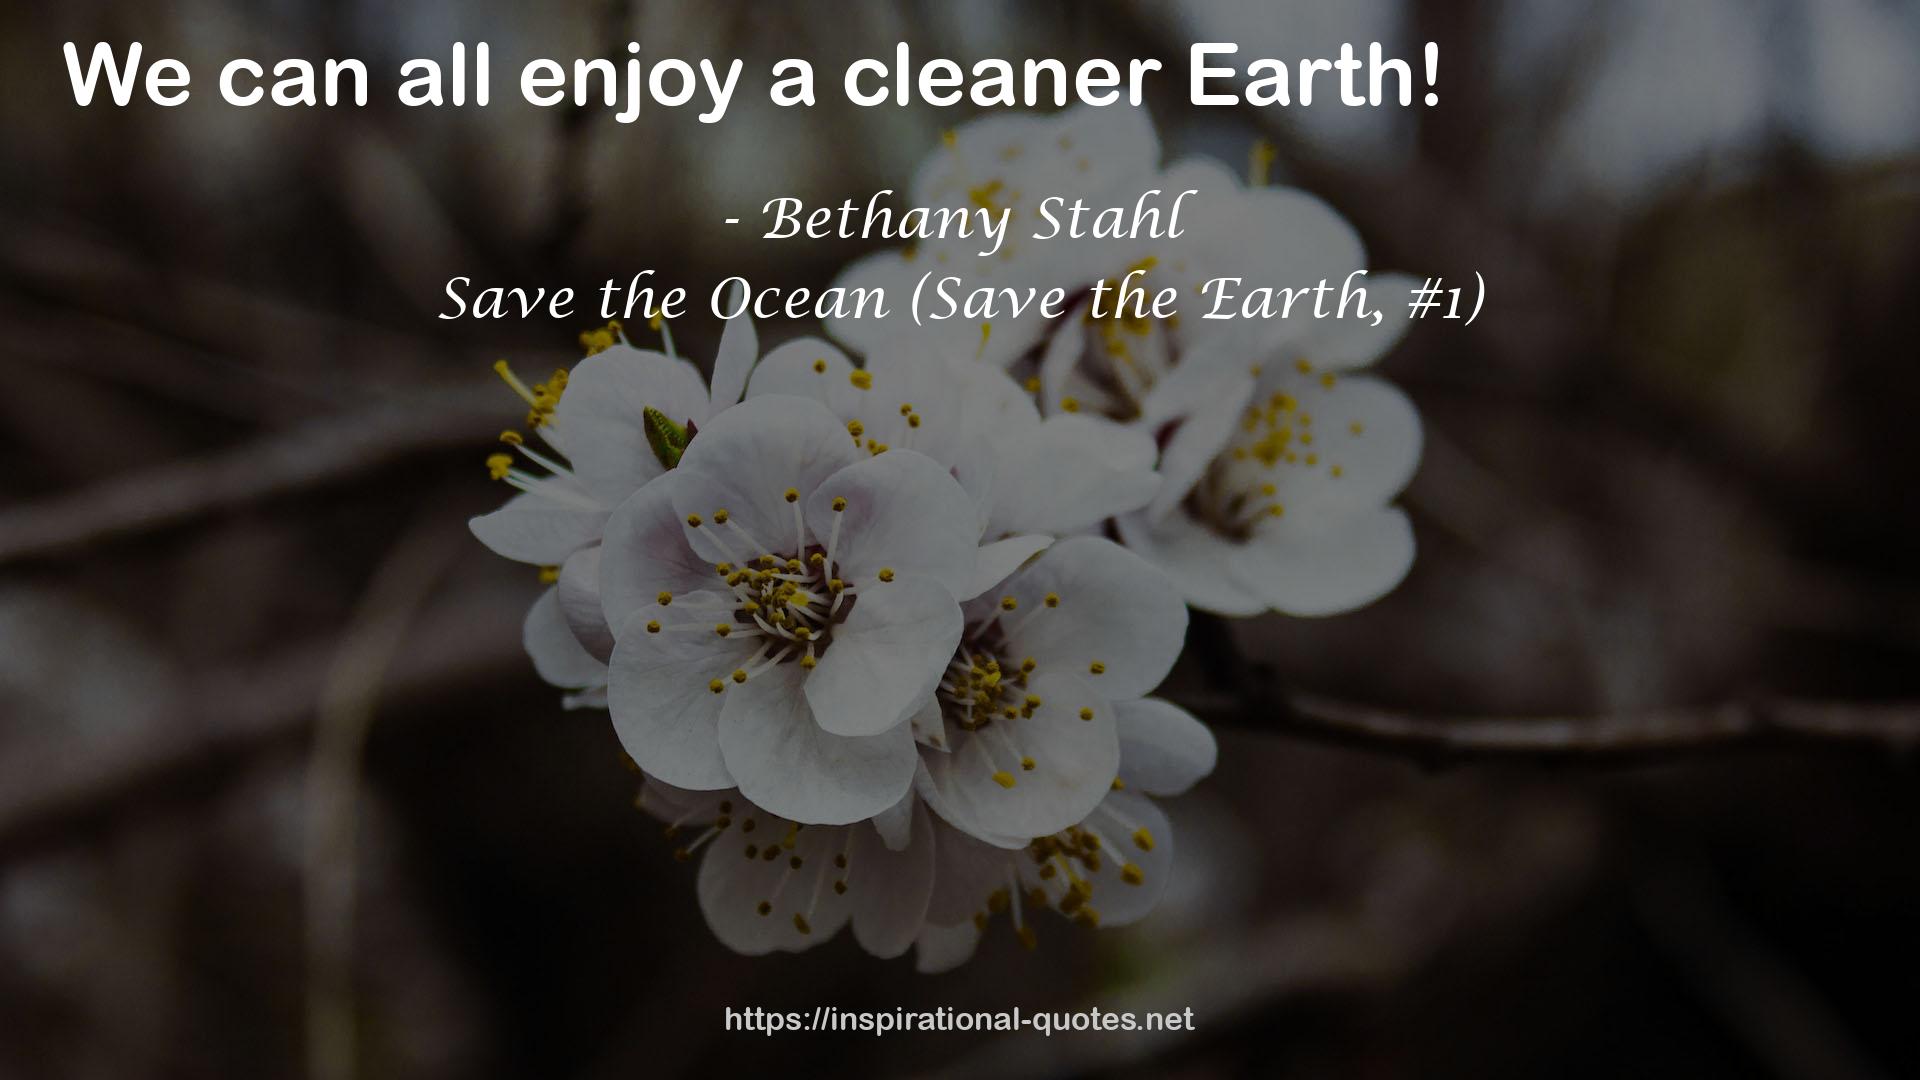 Bethany Stahl QUOTES